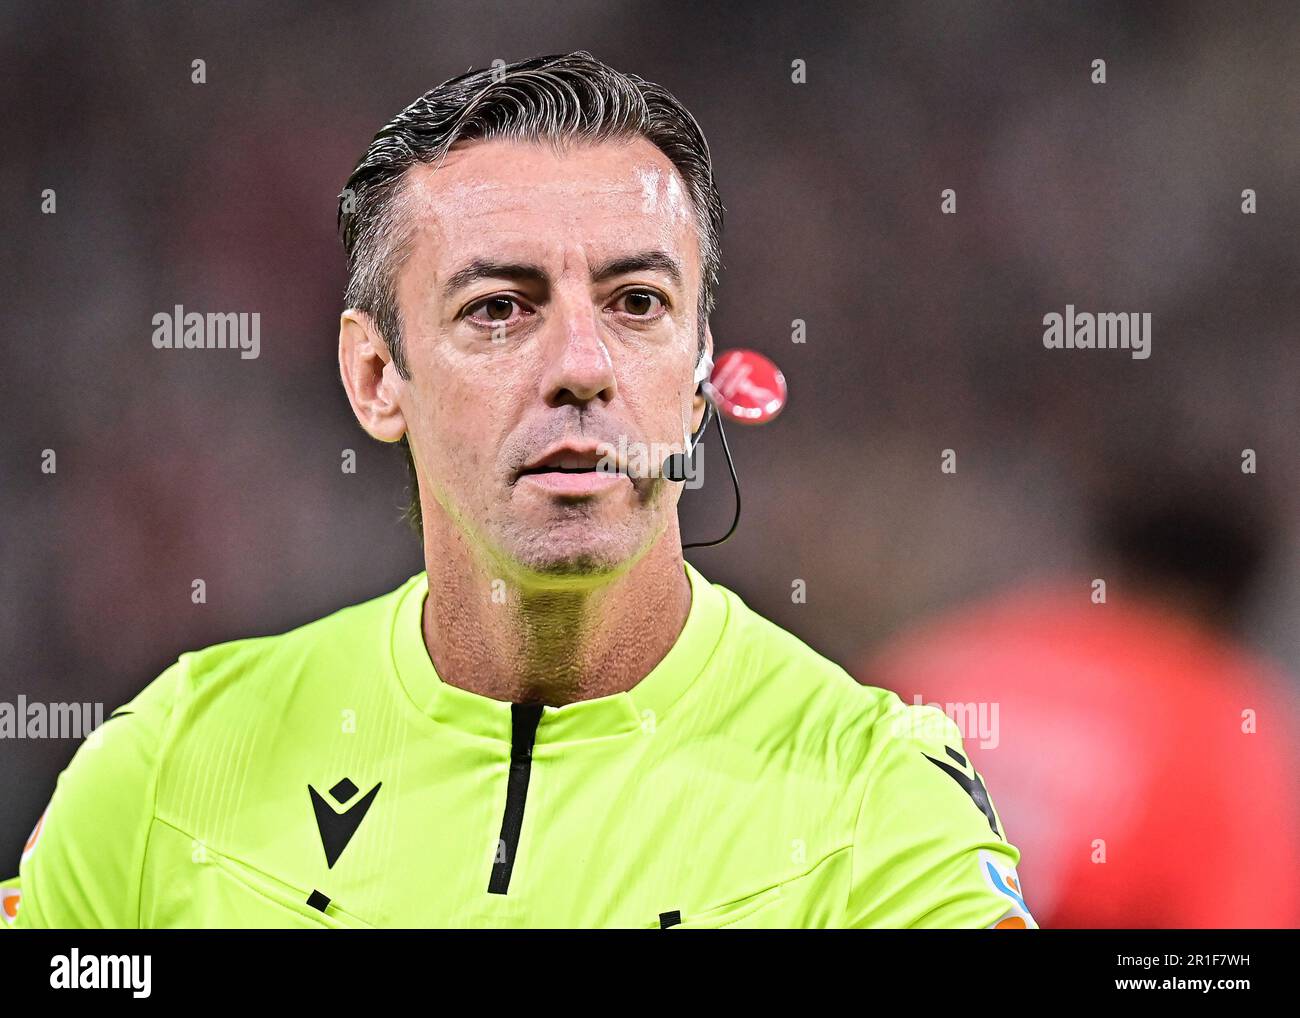 Belo Horizonte, Brazil. 13th May, 2023. Referee Raphael Claus during the match between Atletico Mineiro and Internacional, for the Brazilian Serie A 2023, at Mineirao Stadium, in Belo Horizonte on May 13. Photo: Gledston Tavares/DiaEsportivo/Alamy Live News Credit: DiaEsportivo/Alamy Live News Stock Photo